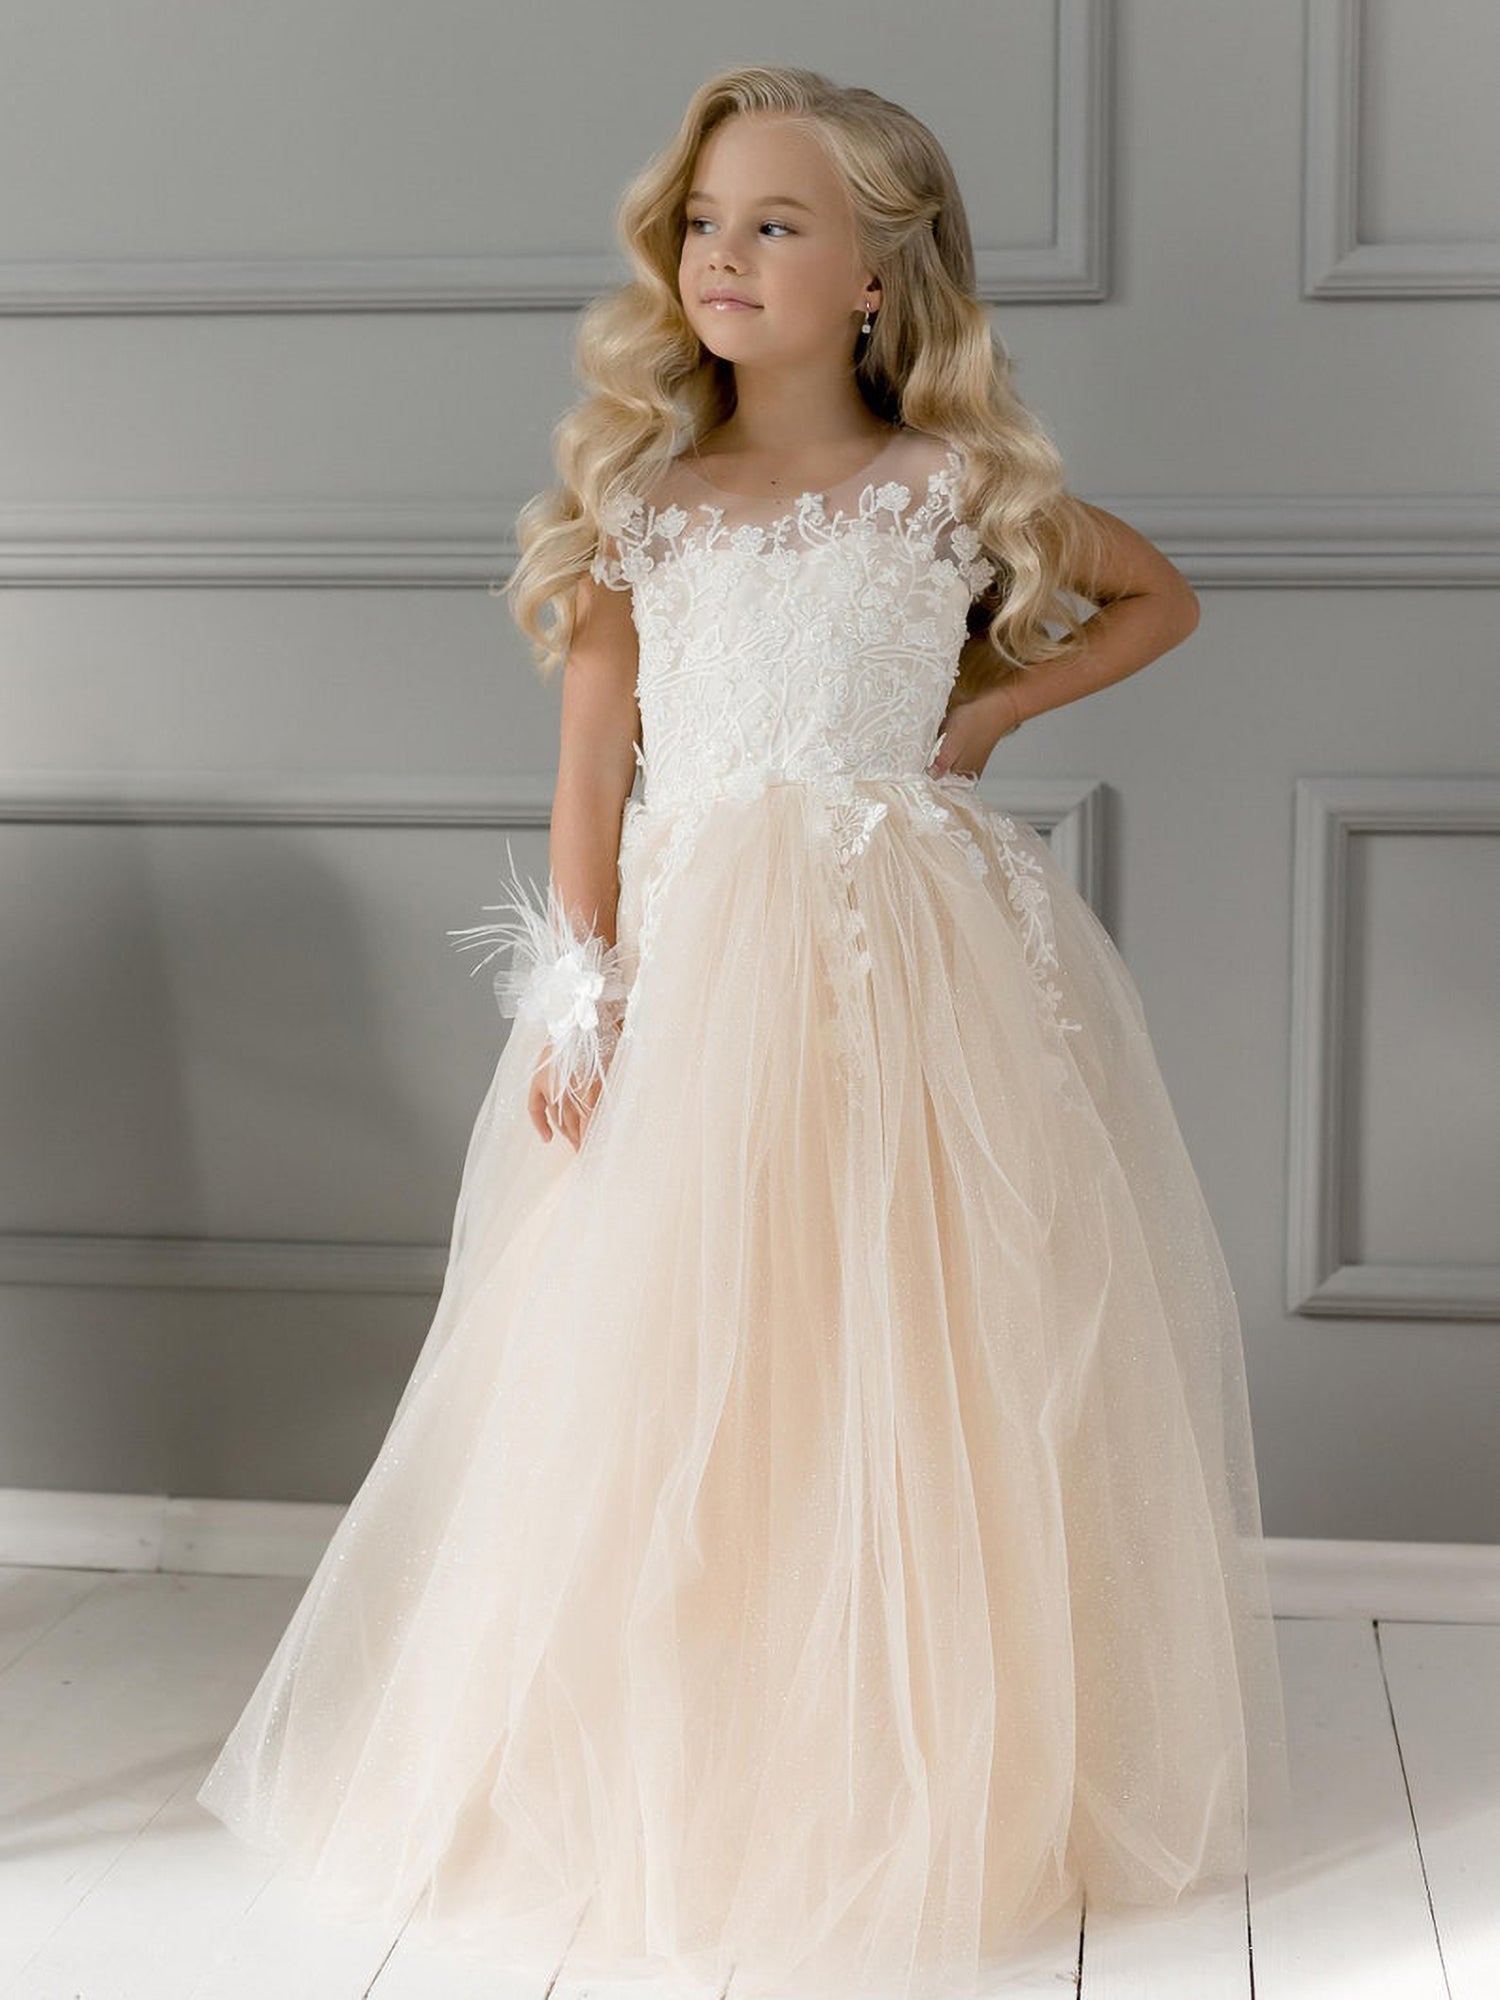 Dresseswow Simple Sleeveless A-line Flower Girl Dresses Tulle with Appliques Lace Pearls